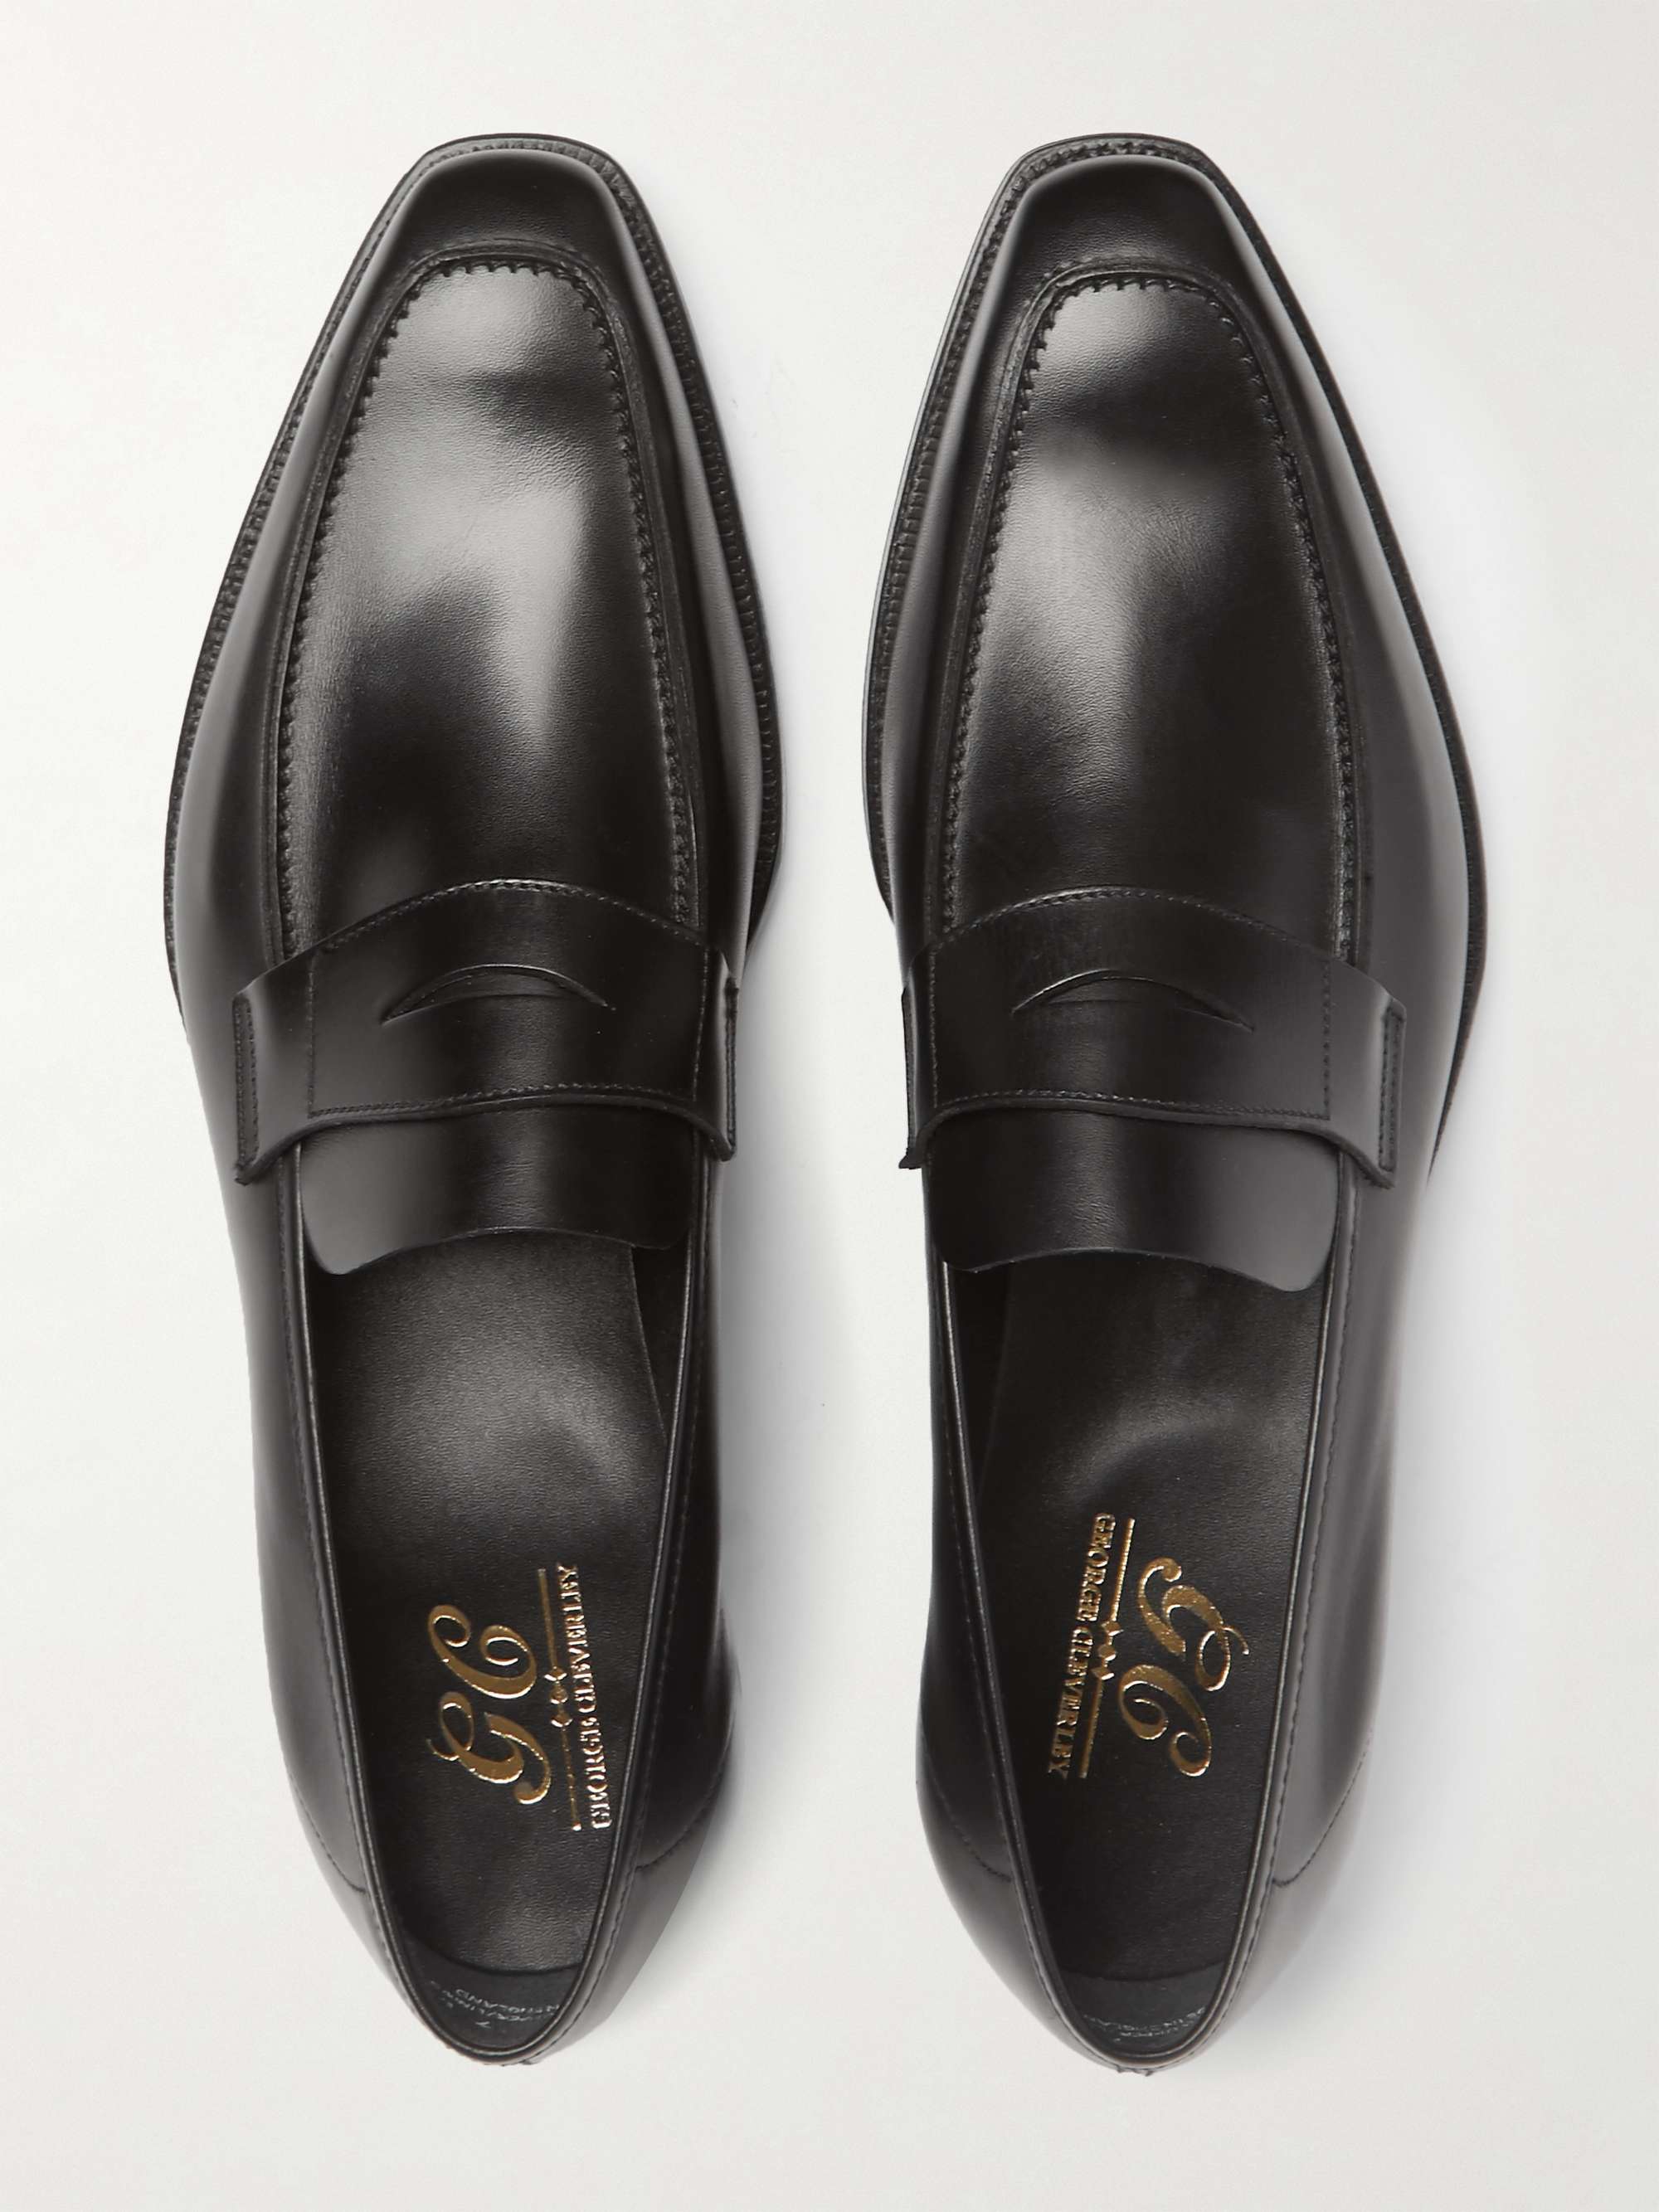 Black George Leather Penny Loafers | GEORGE CLEVERLEY | MR PORTER